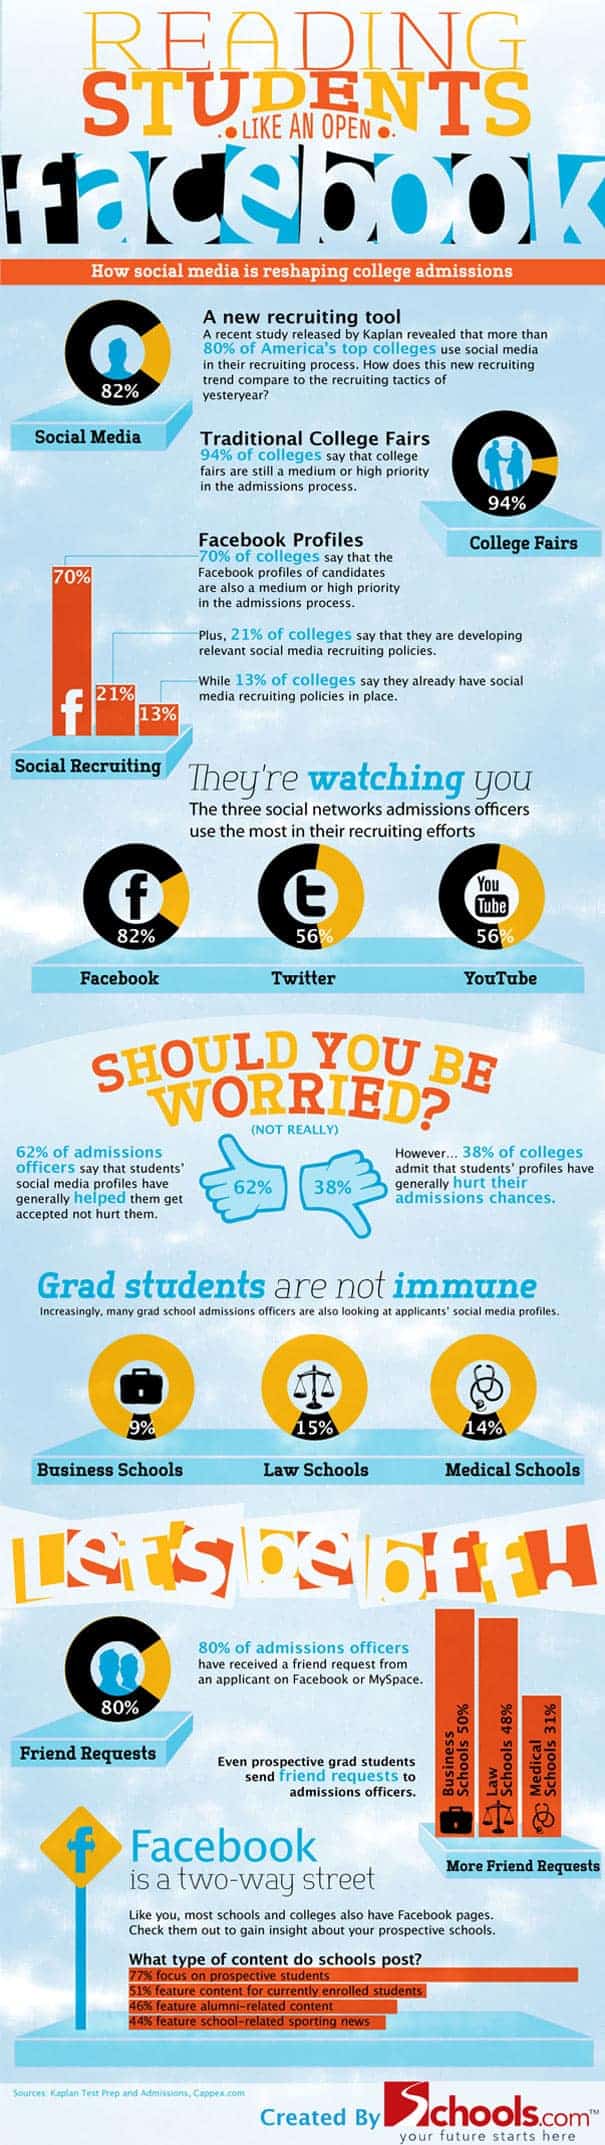 How Social Media Is Reshapping College Admissions